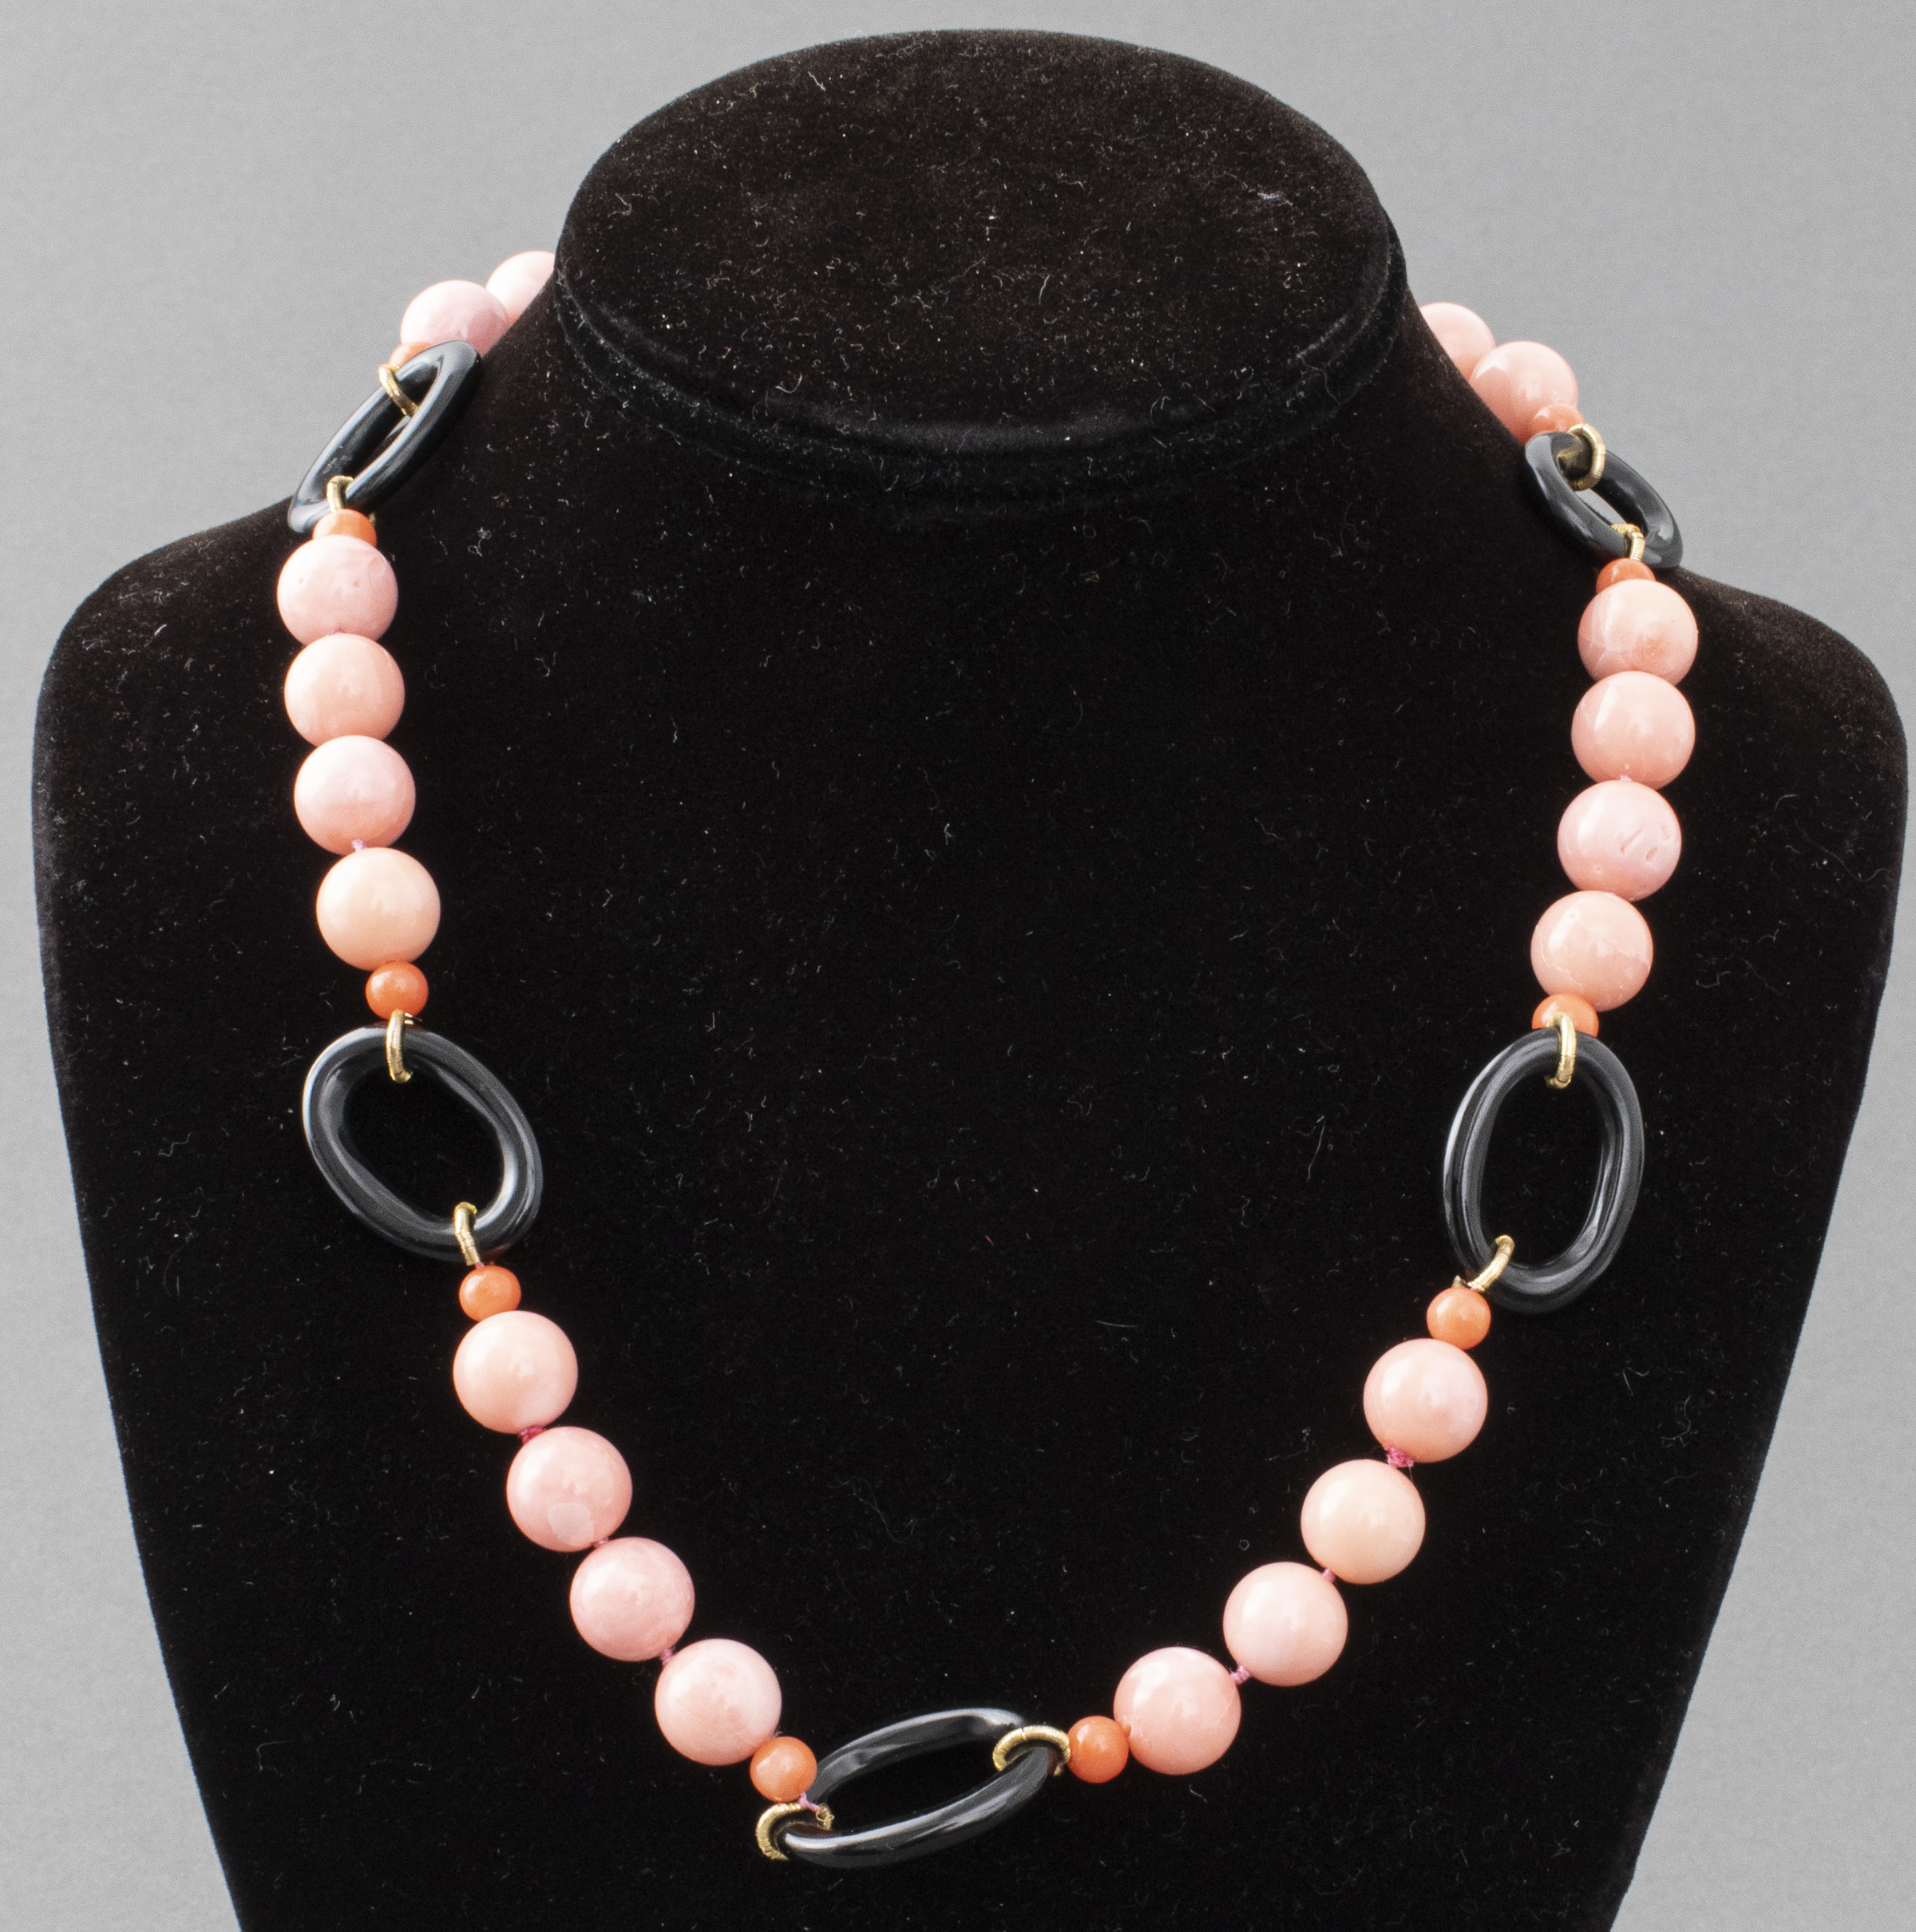 PINK CORAL BEAD BLACK ONYX NECKLACE 3c44ca